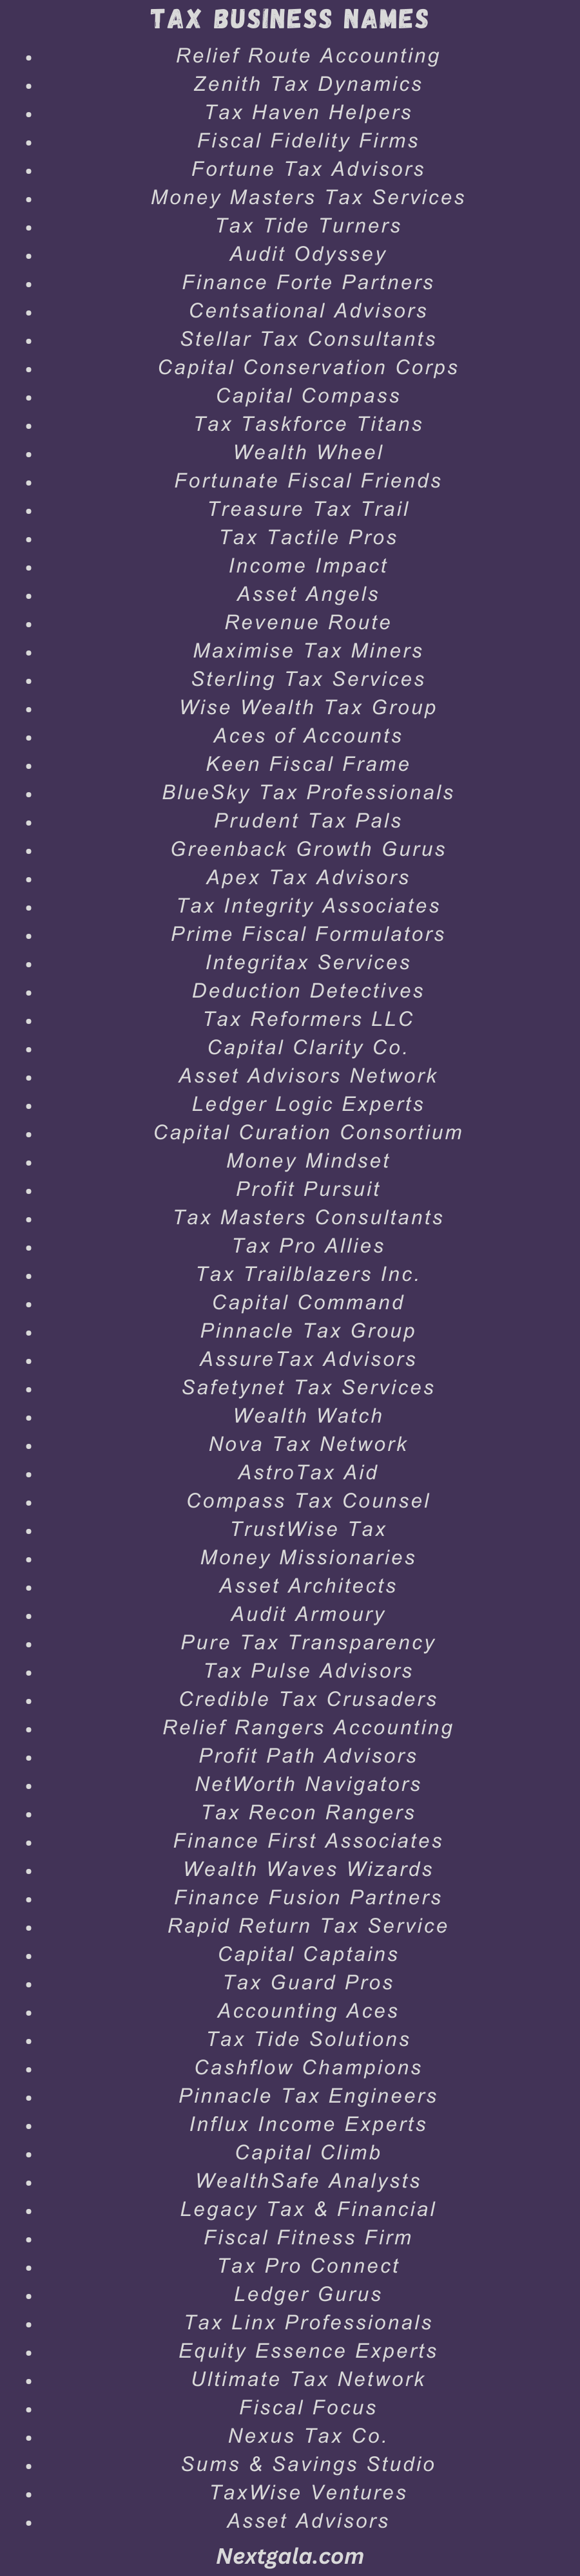 Tax Business Names